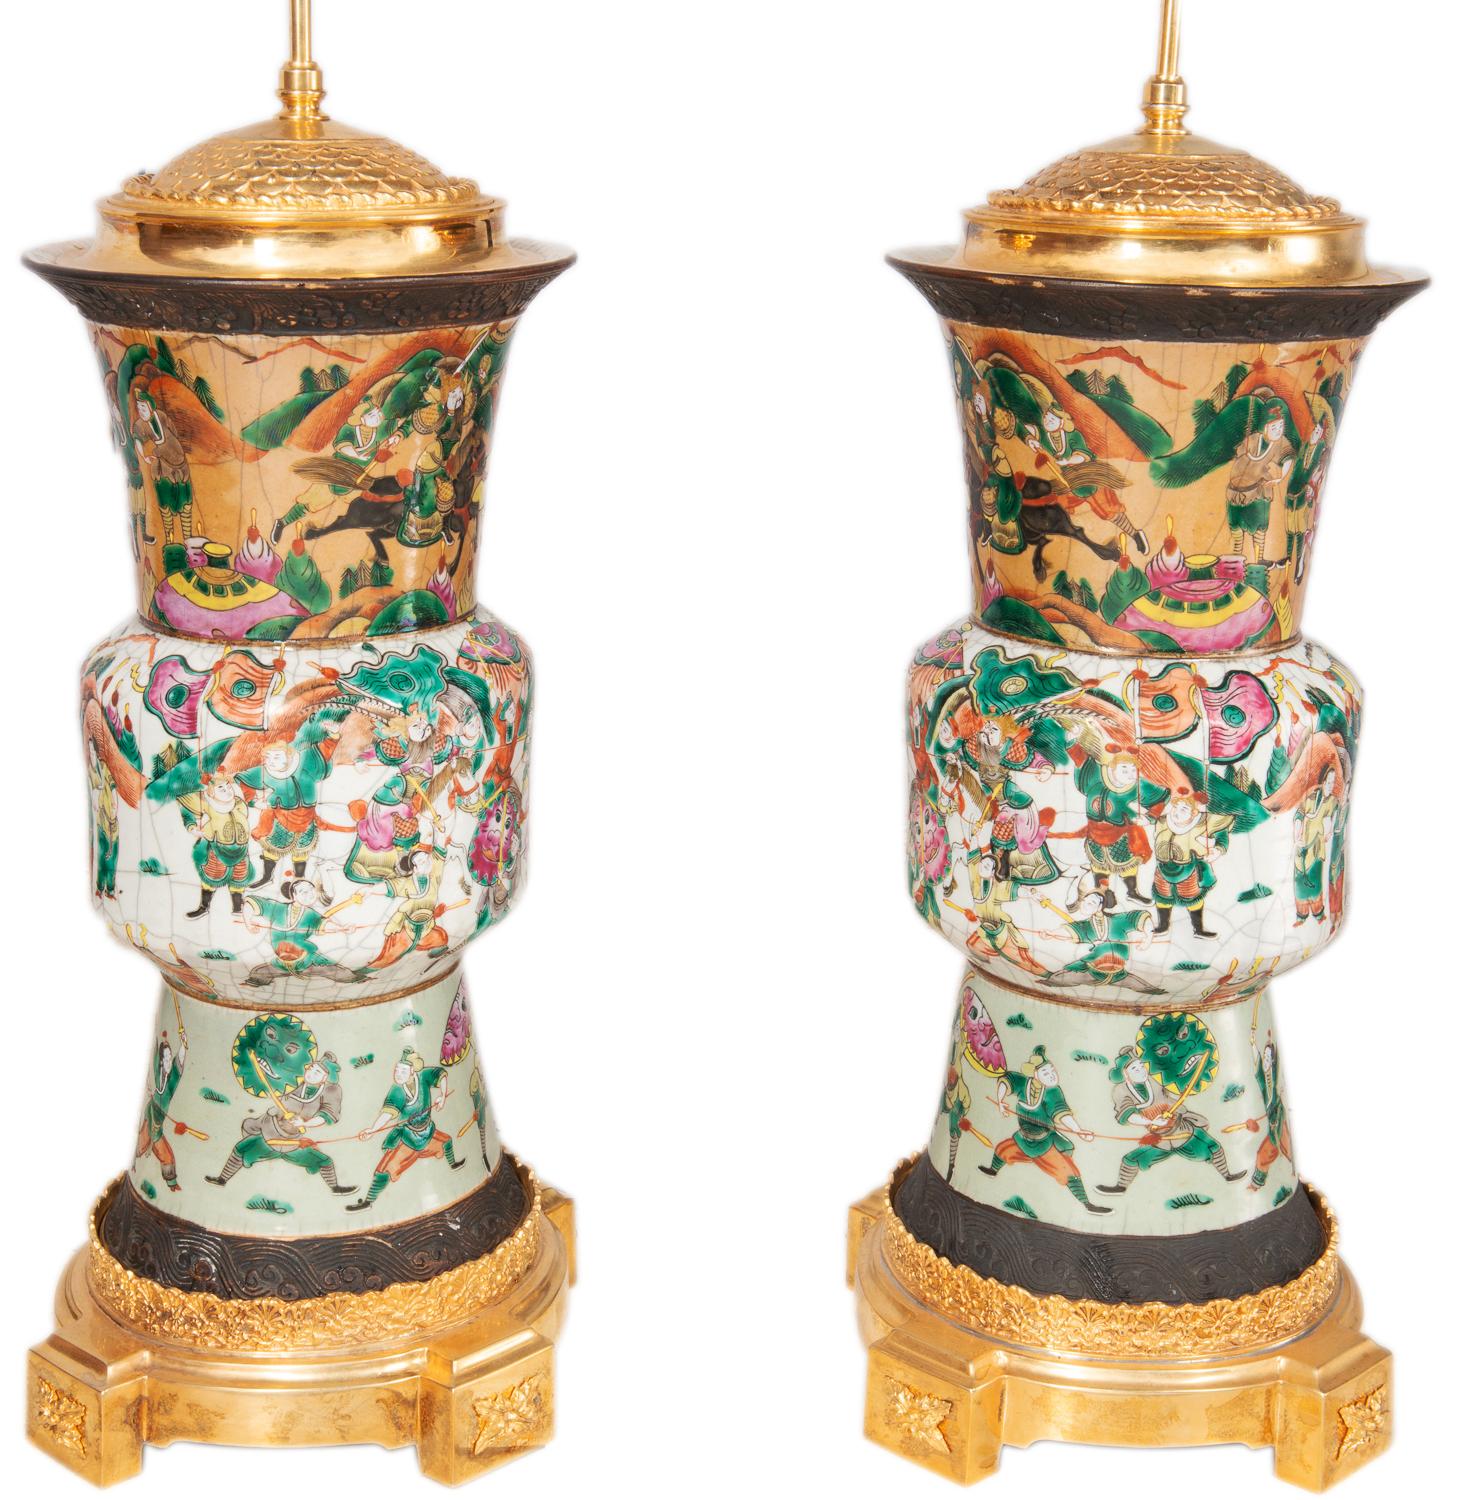 A pair of late 19th century Chinese crackle-ware vases/lamps. Each with various battle scenes with warriors on horseback, mounted with wonderful gilded ormolu lids and bases.